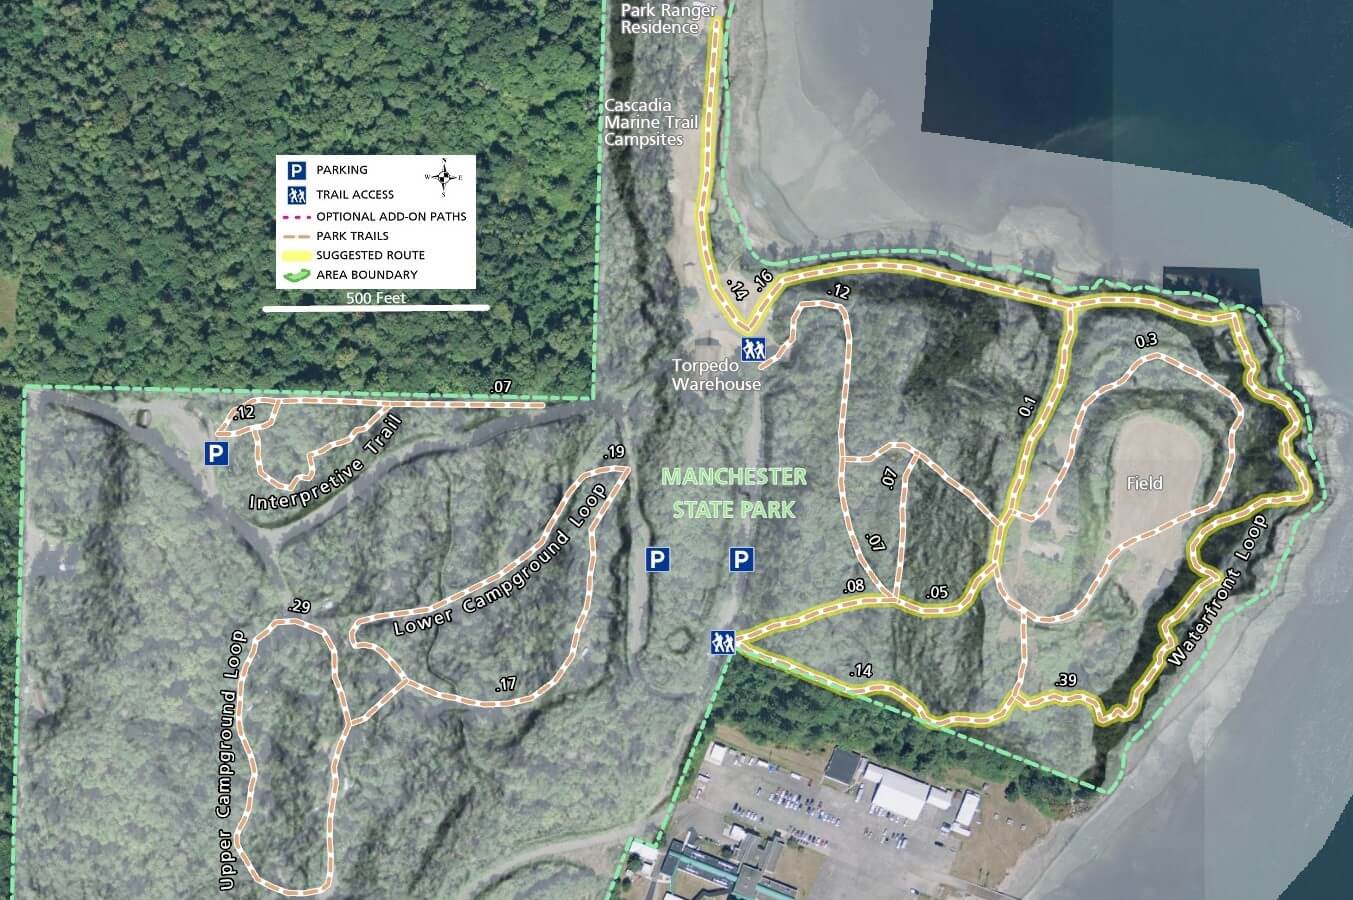 Manchester State Park Trail Map - Imagery